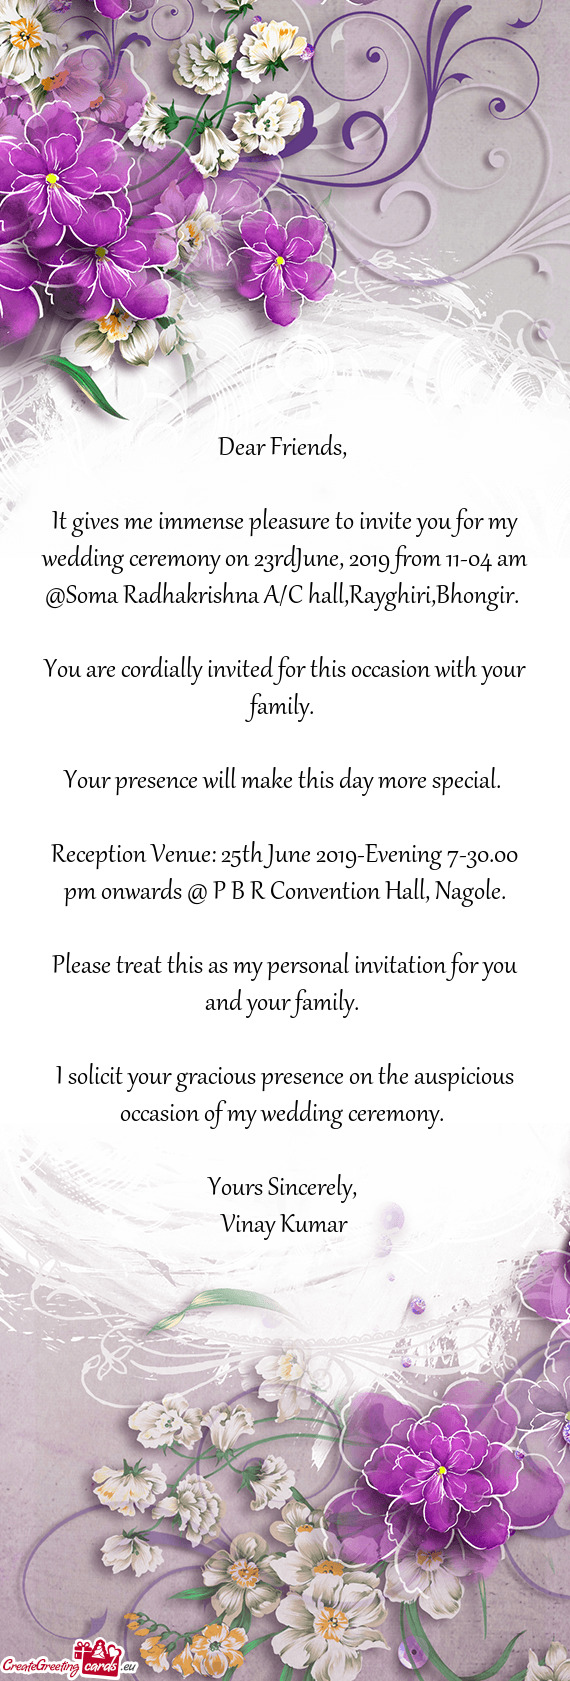 It gives me immense pleasure to invite you for my wedding ceremony on 23rdJune, 2019 from 11-04 am @